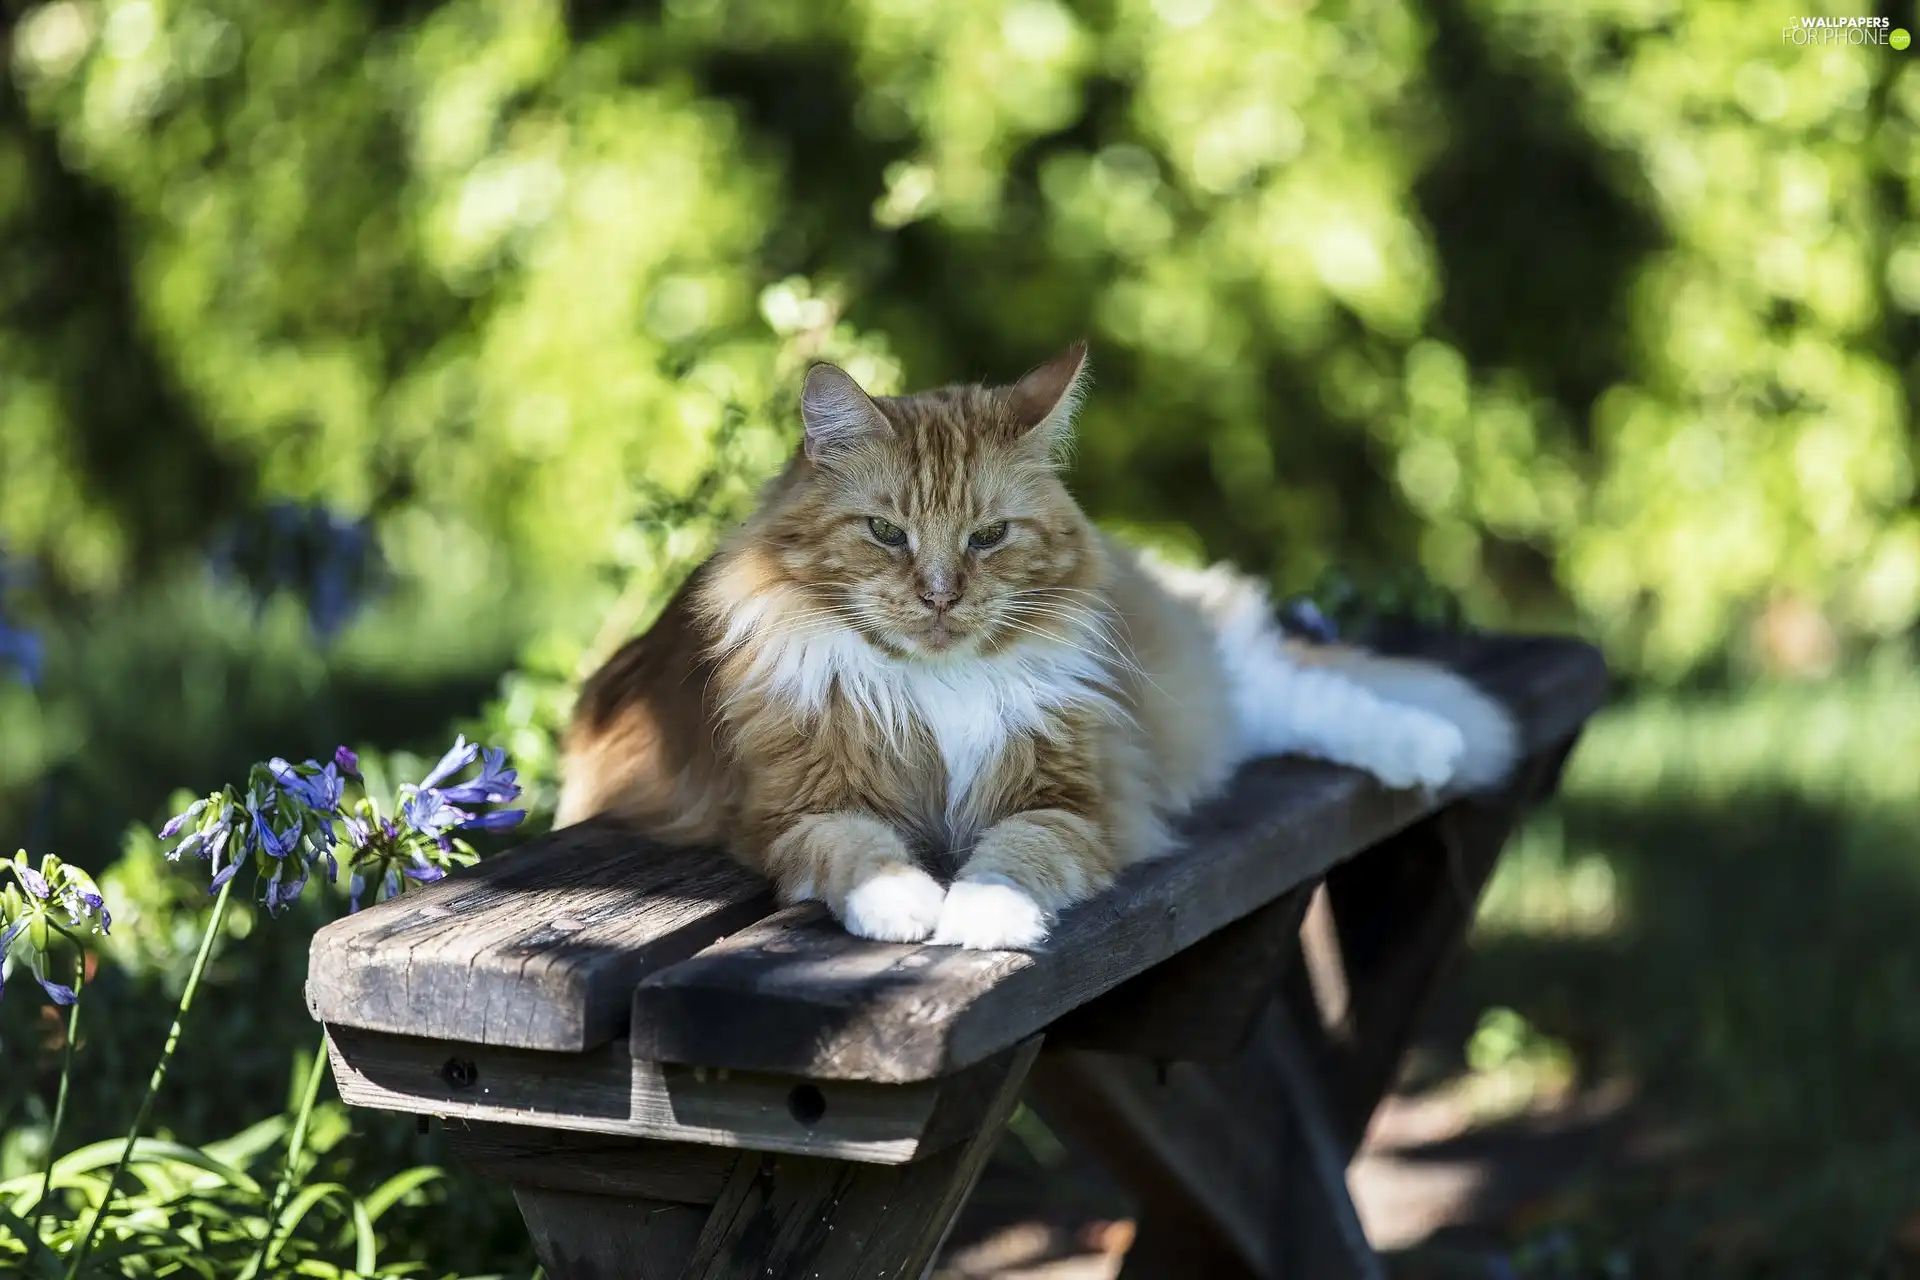 lying, Longhaired, Bench, cat